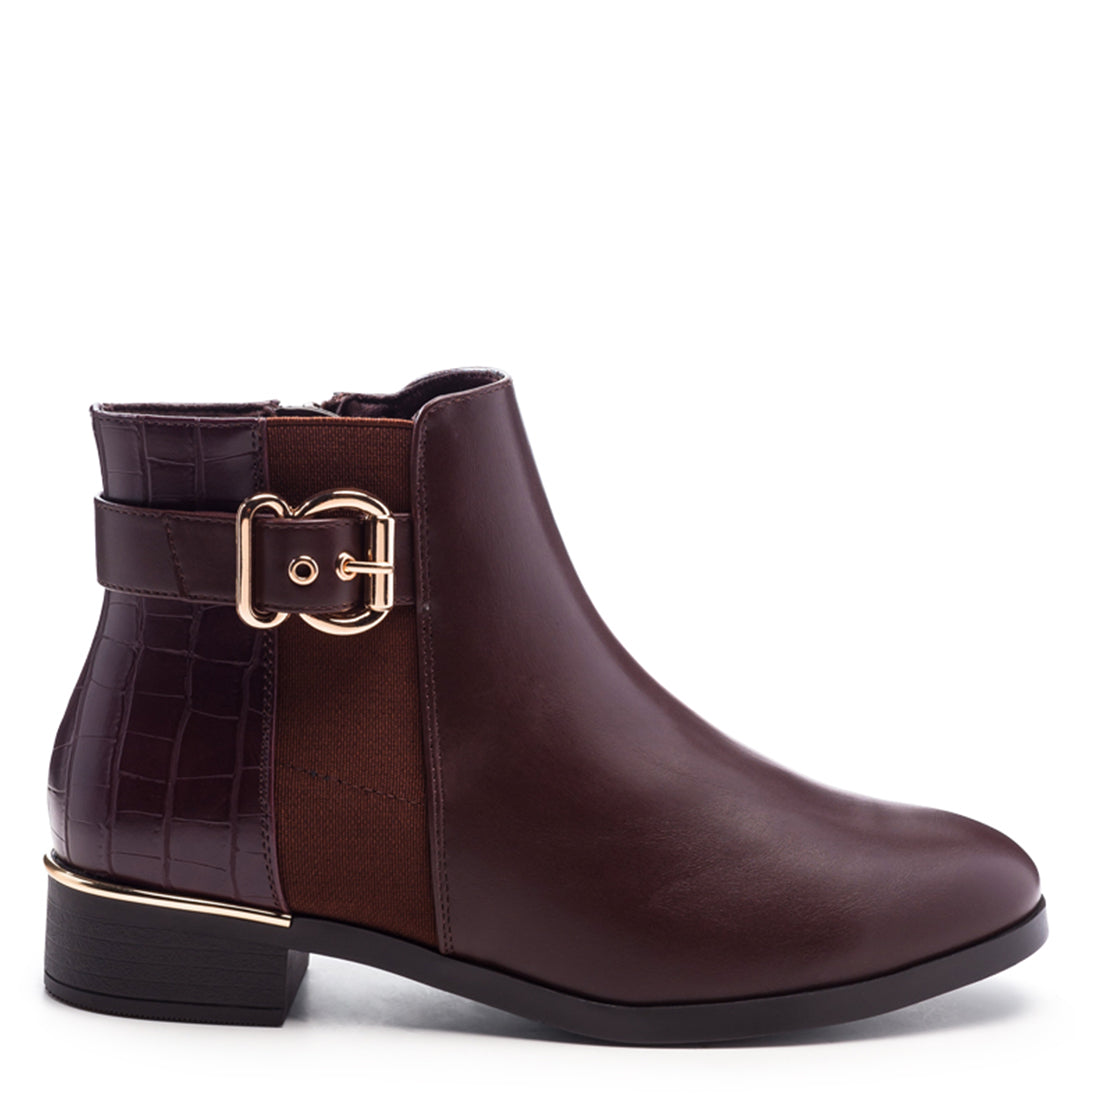 Buckled Ankle Boot with Croc Detail in Brown - UK5